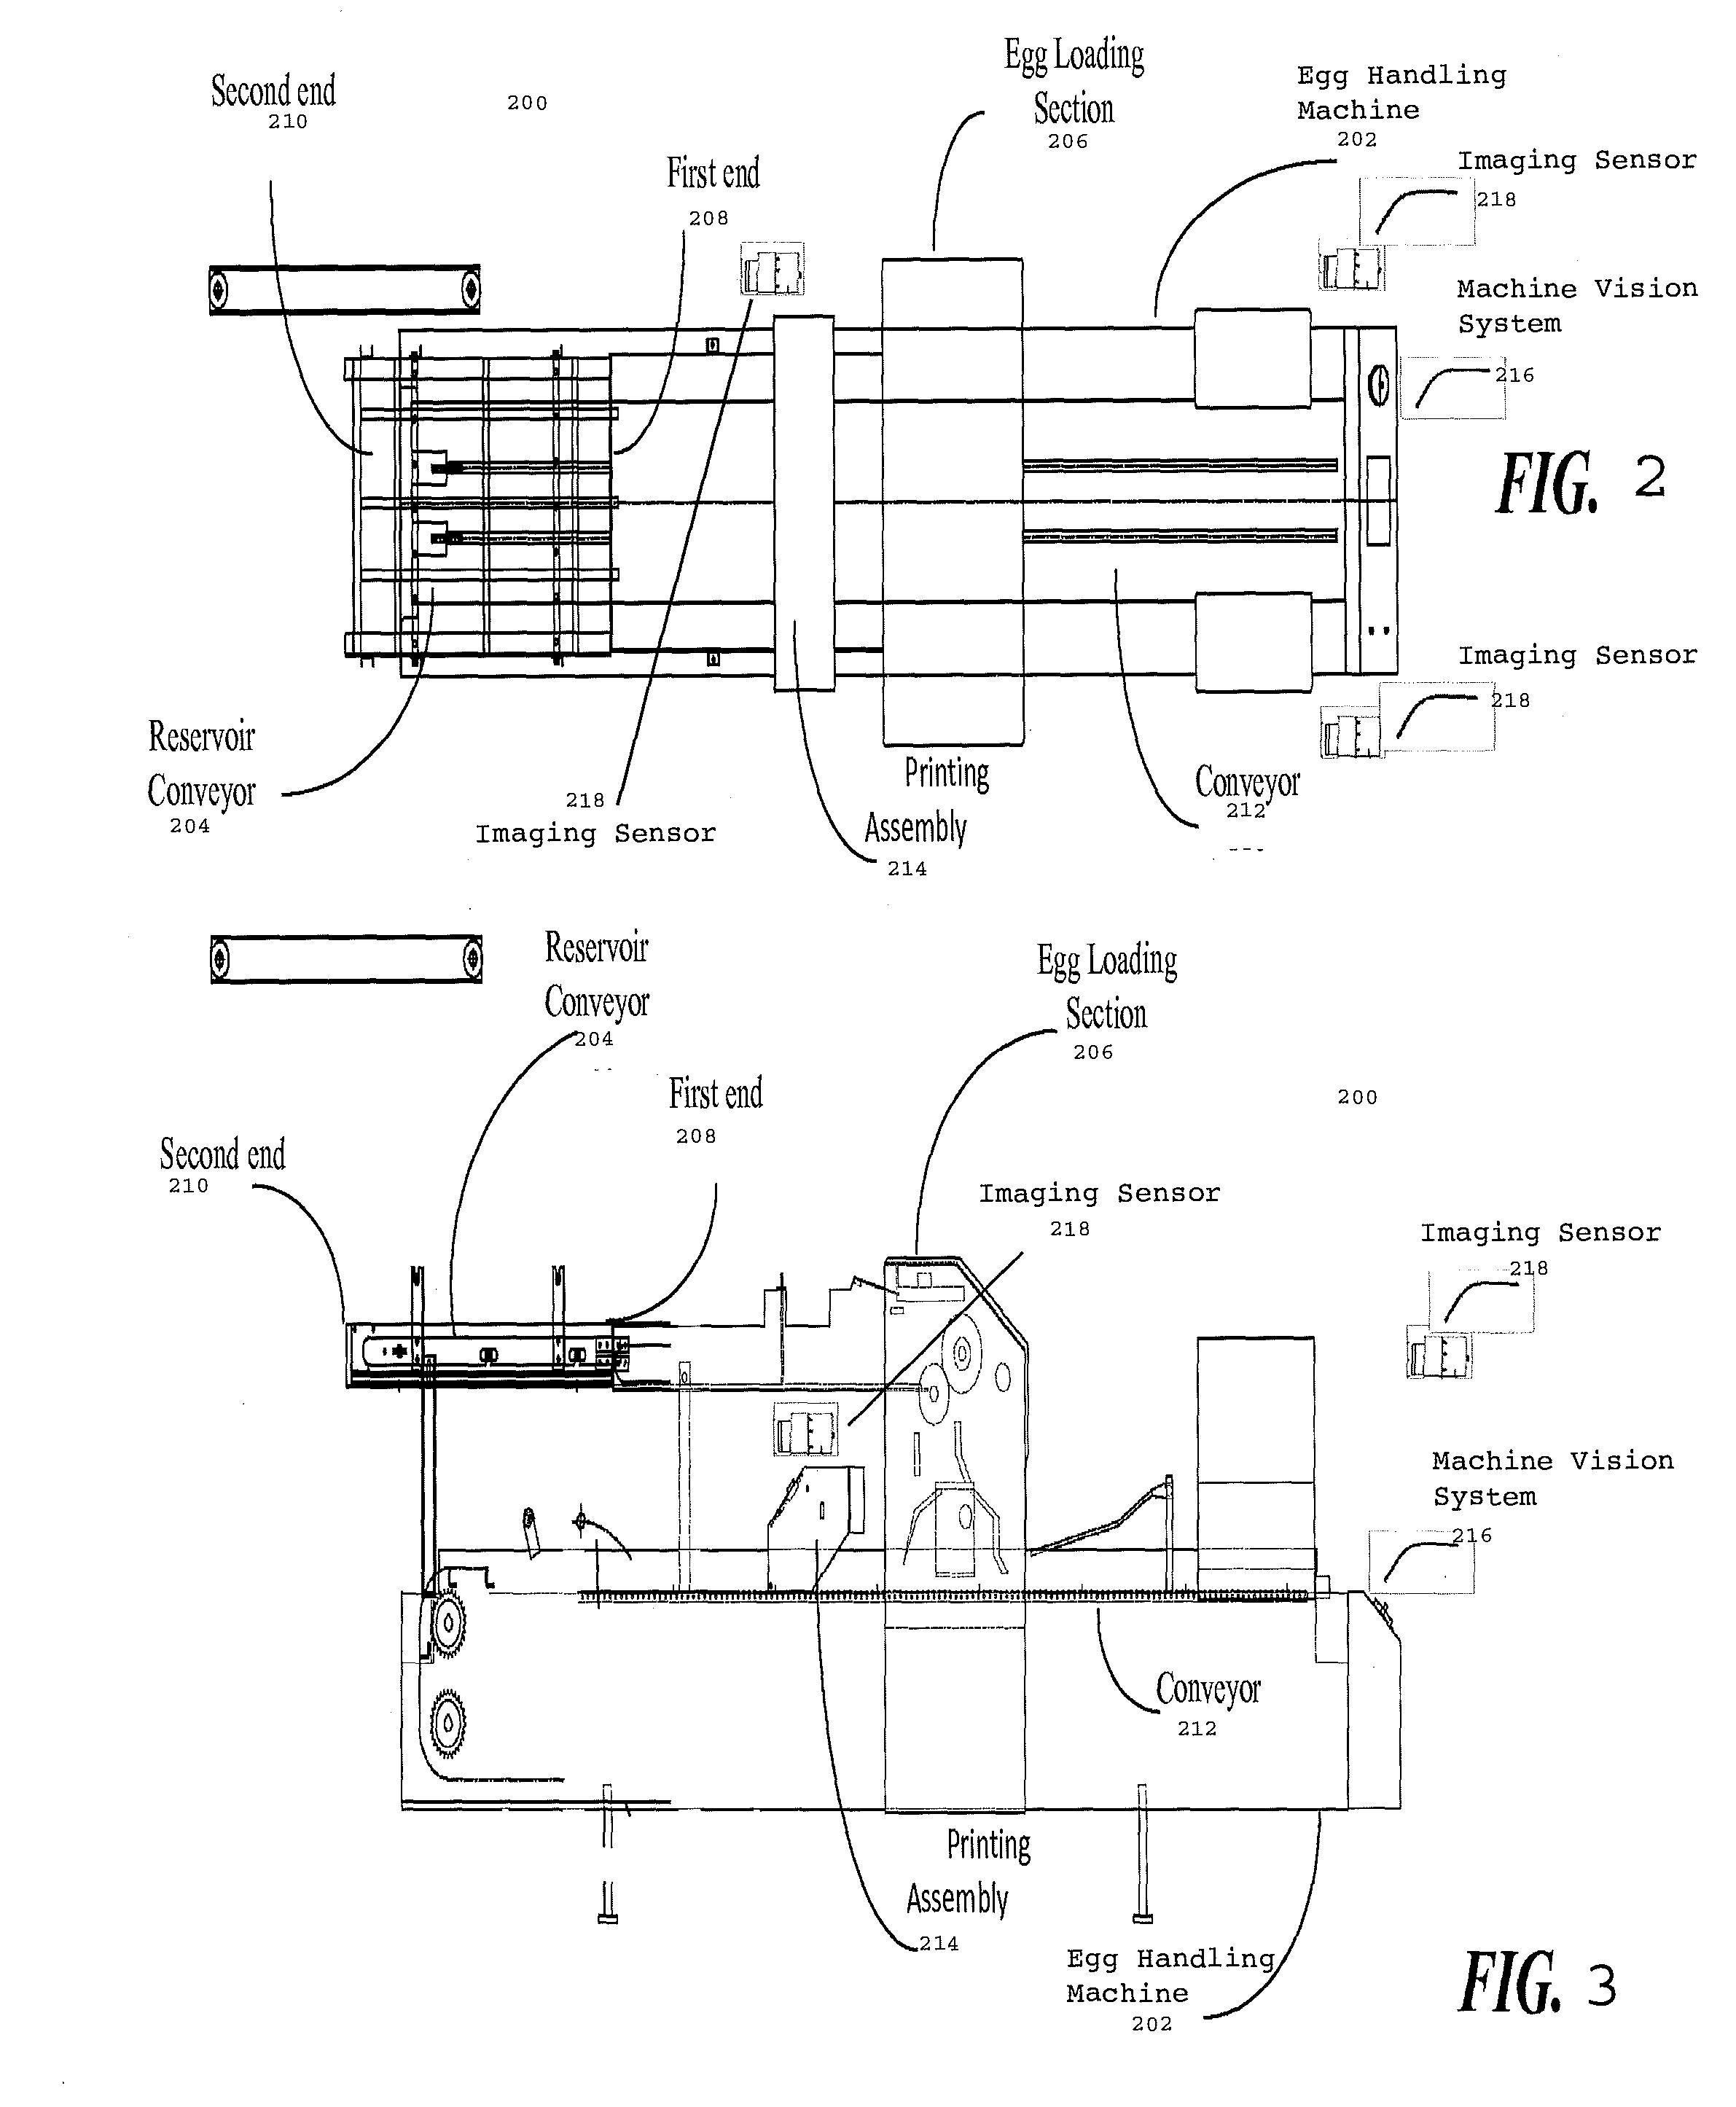 Method and system for applying ink markings on food products